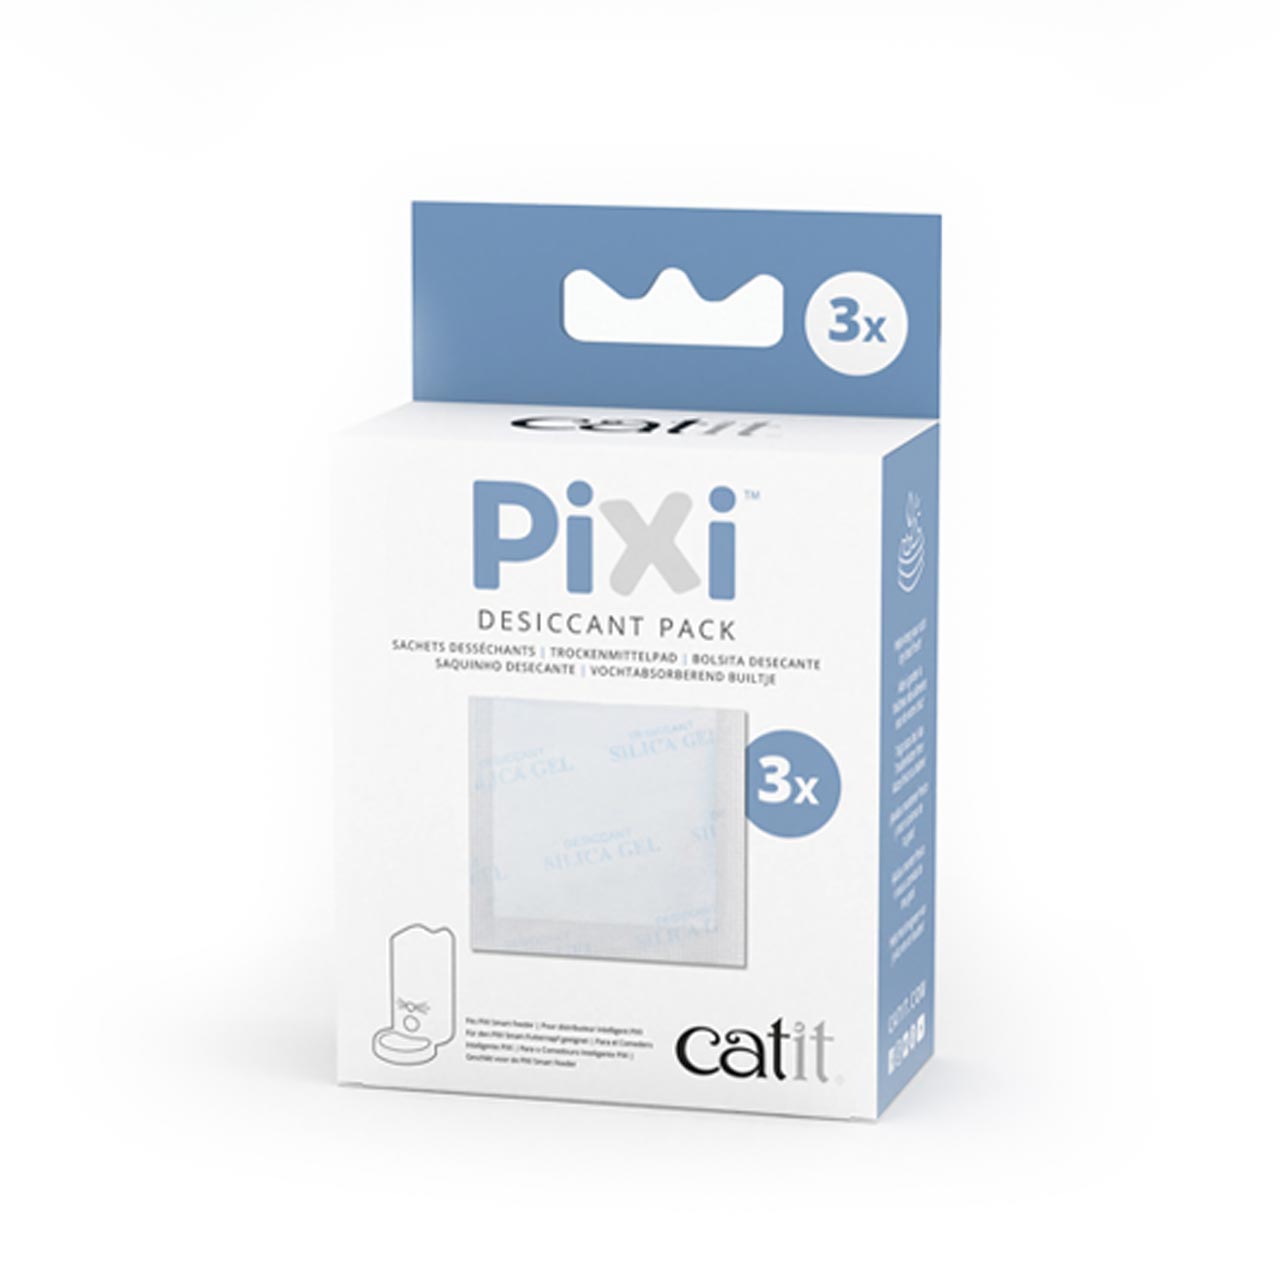 Packaging PIXI Desiccant Pack